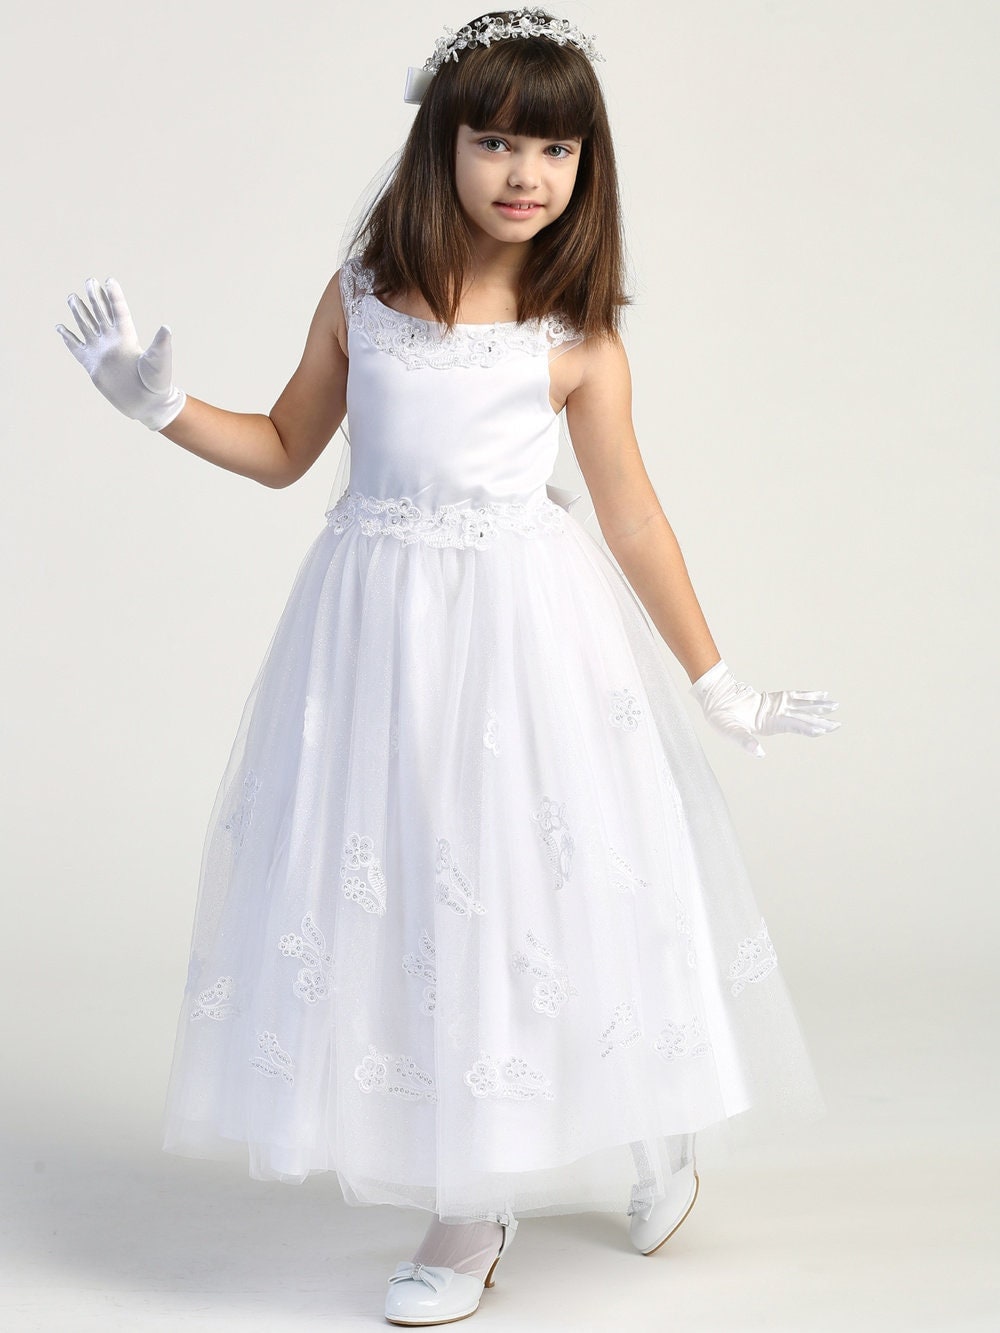 A girl wearing an elegant white First Communion Dress with a satin bodice adorned with embroidered appliques trimmed with beads and sequins.